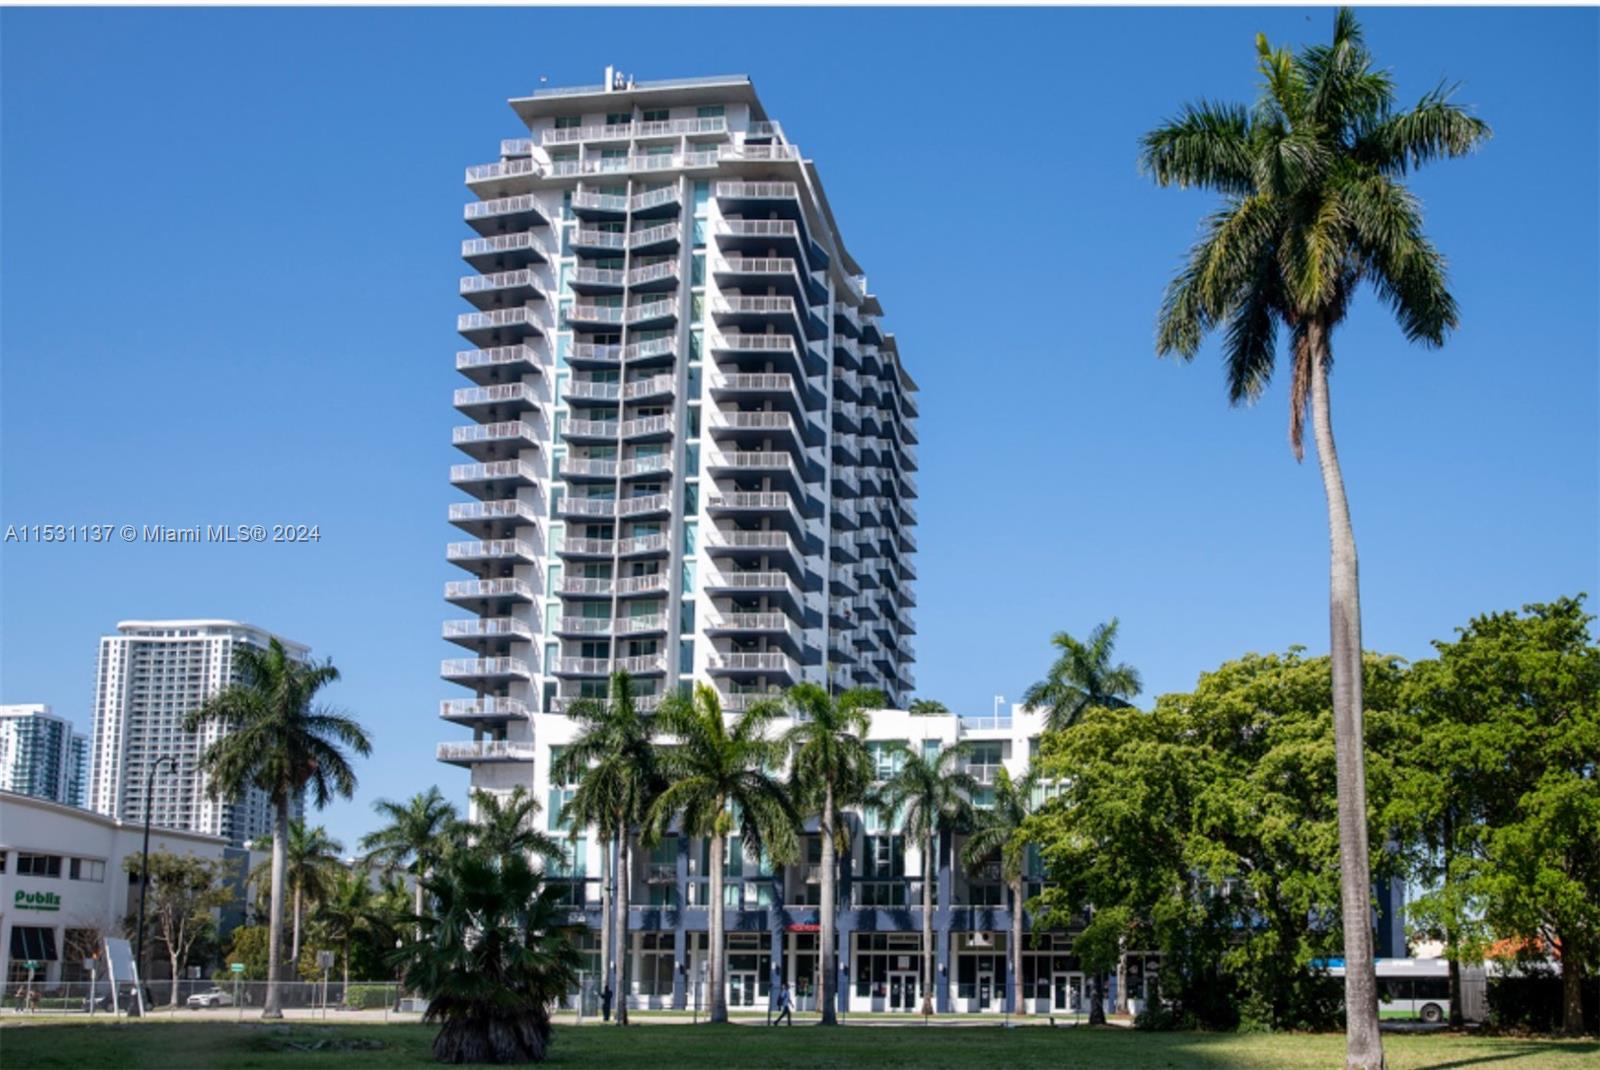 Exquisite Edgewater Retreat with Bay Views!
Step into the pinnacle of Miami lifestyle with this meticulously remodeled Edgewater gem. The open floorplan seamlessly merges spacious living and dining areas, complemented by captivating bay views. Currently configured for modern living, this unit can be effortlessly converted back into a 3-bedroom sanctuary.

Nestled within walking distance of cultural hubs and dining, and with easy access to Wynwood, Design District, and beyond, this rare corner unit offers breathtaking spaces with a balcony that has no comparison.

Enjoy the outdoors on your spacious balcony and benefit from the convenience of the location. This unique offering won't last. Schedule a showing now and make this breathtaking Edgewater residence your own!